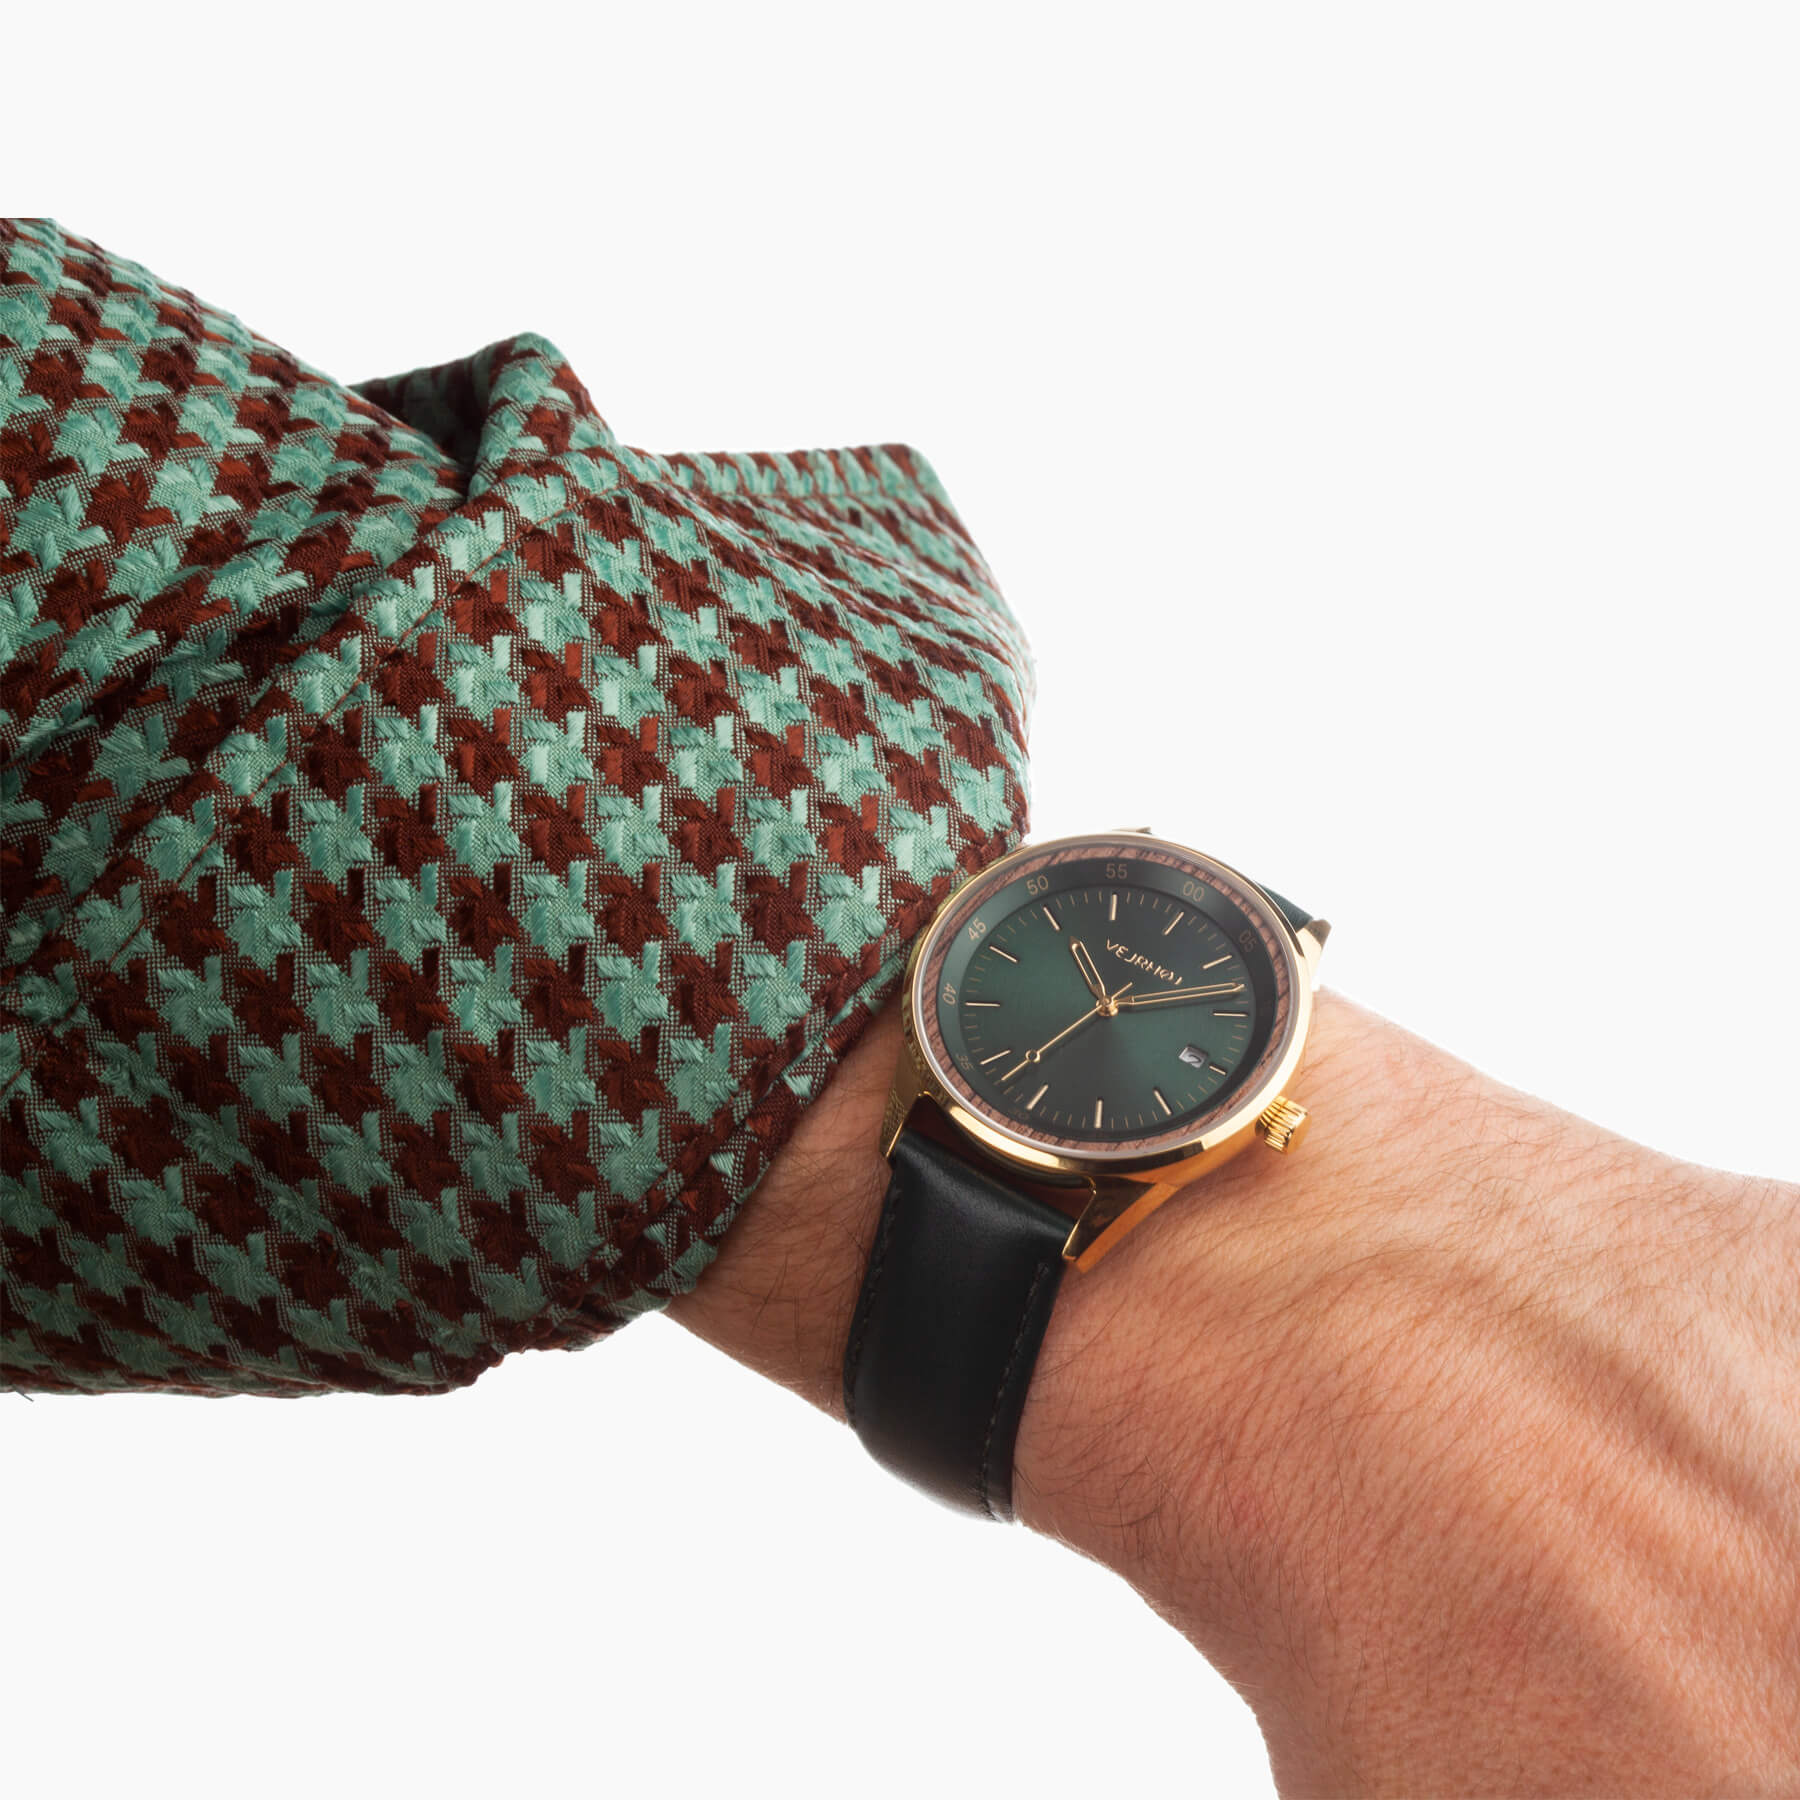 automatic wrist watch being worn with a green jacket resulting in a great pairing